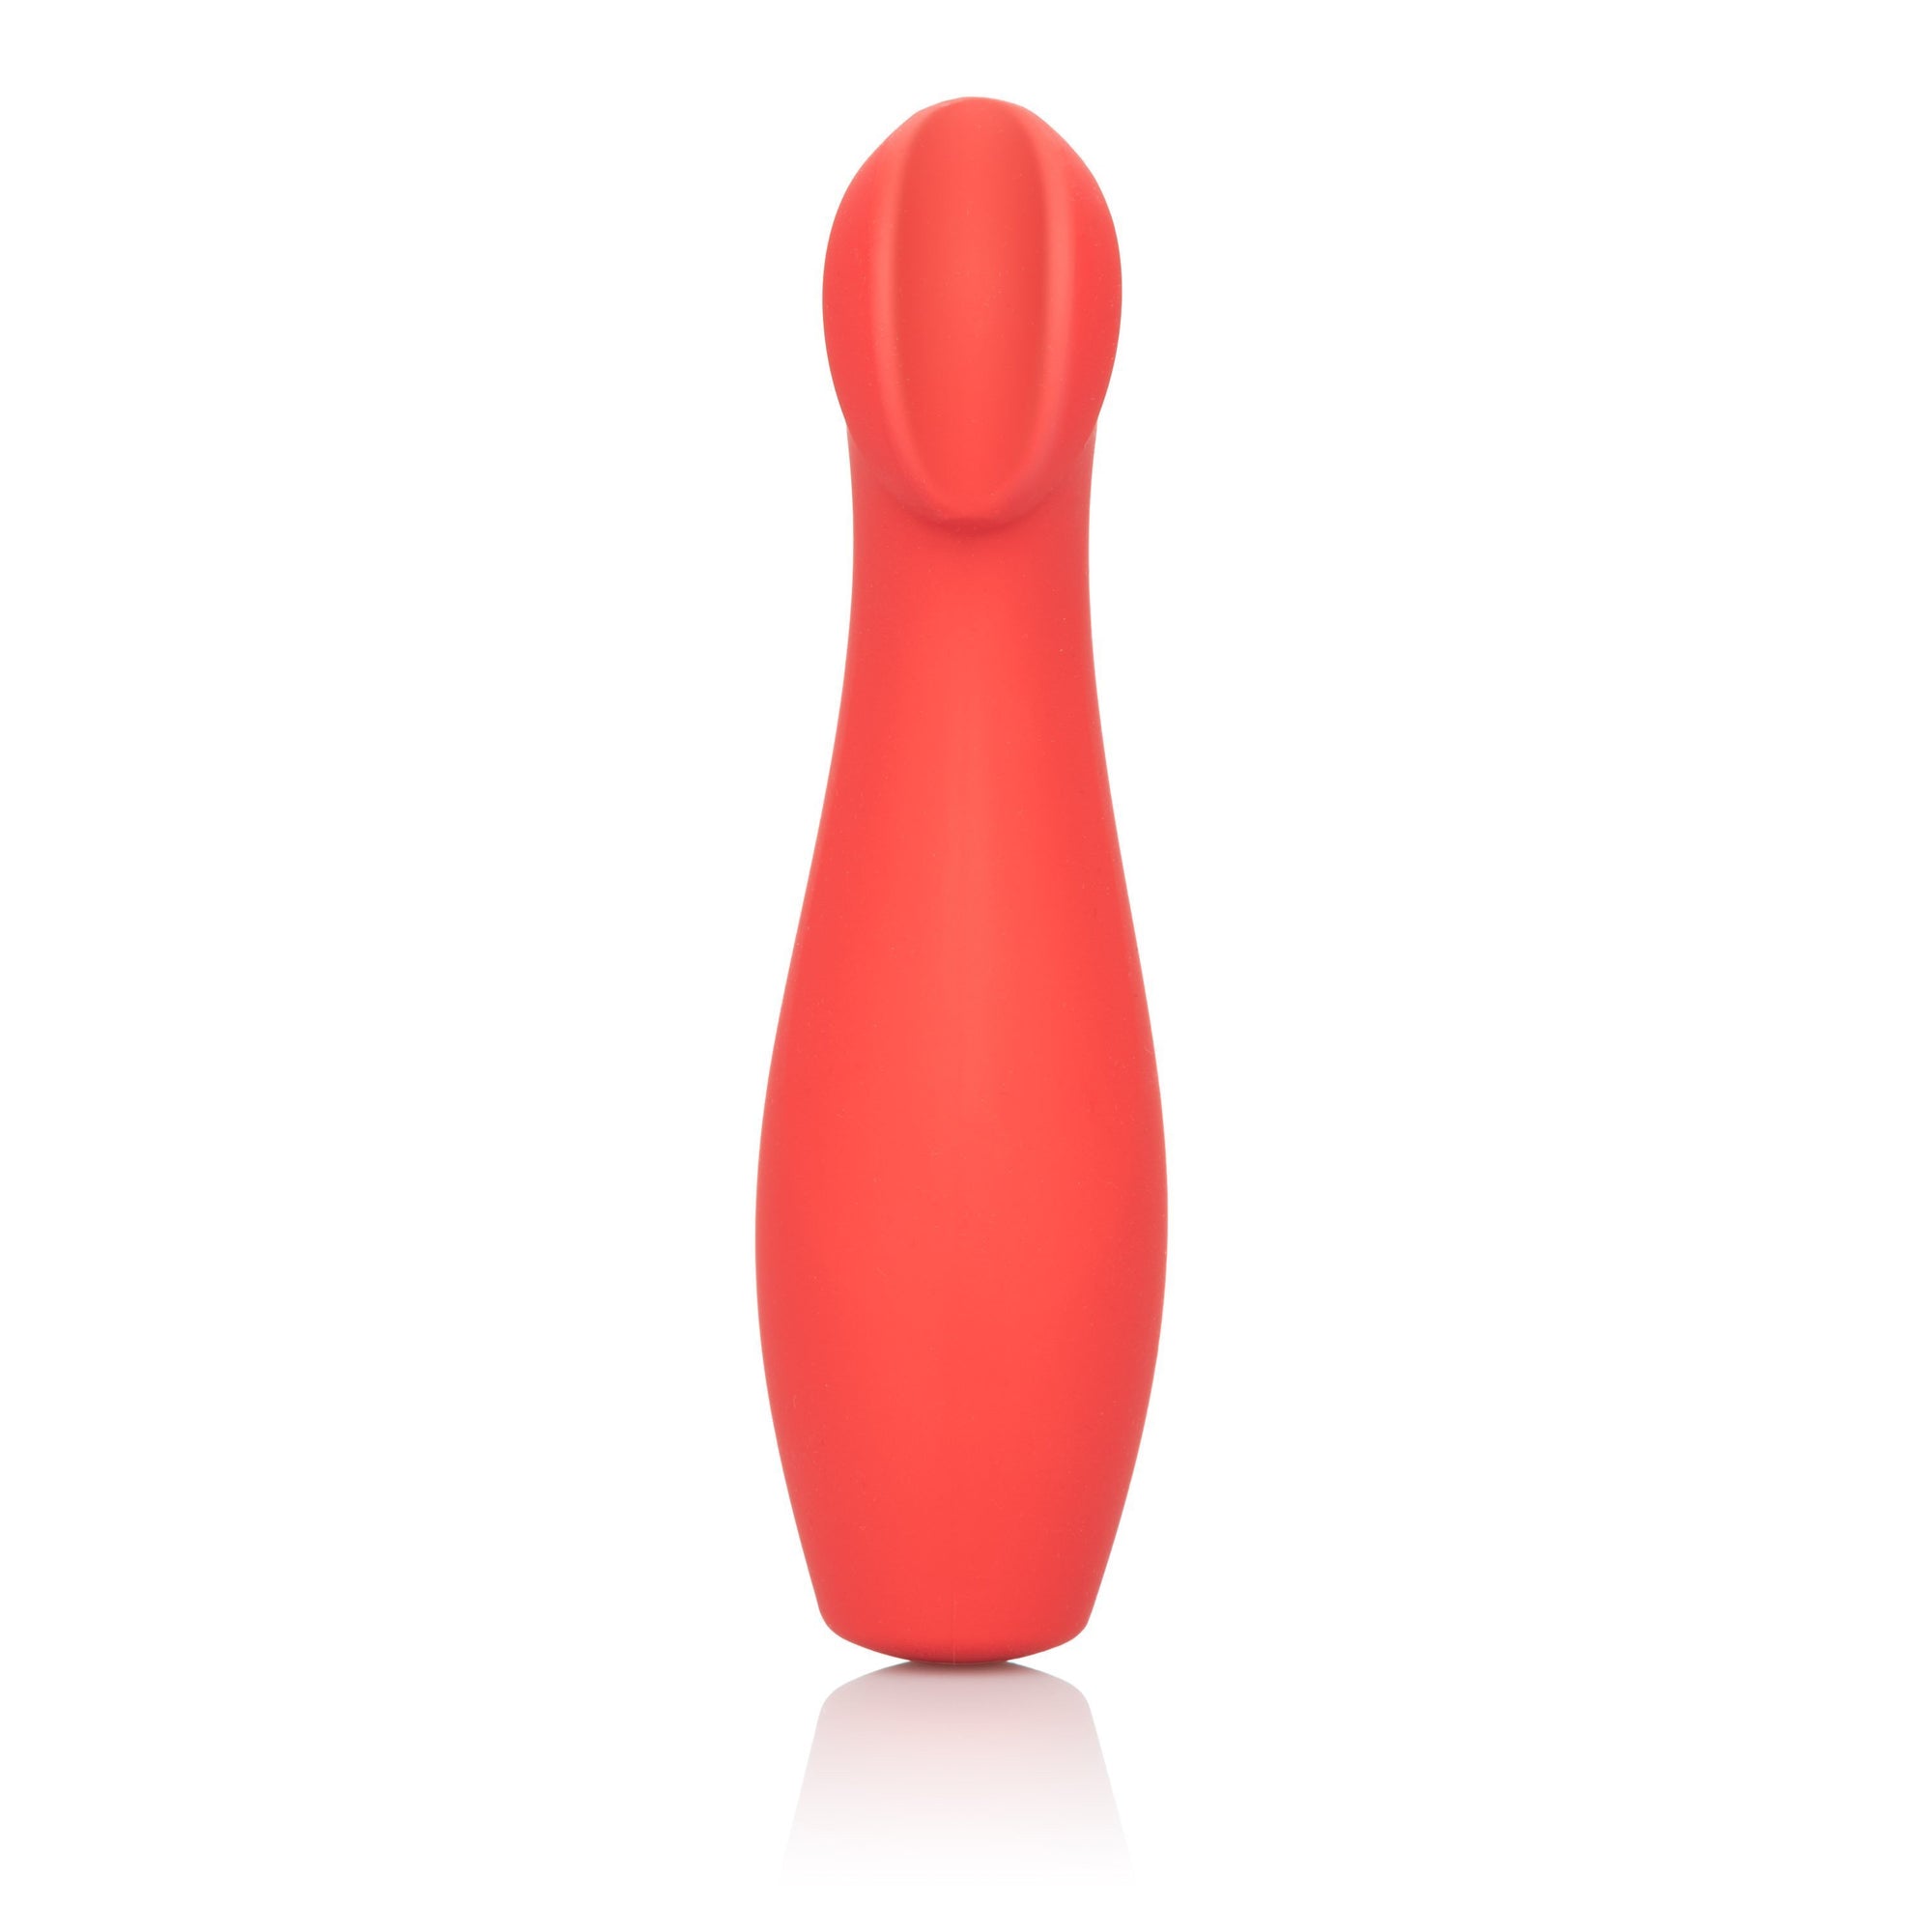 California Exotics - Red Hot Ignite Rechargeable G Spot Vibrator (Red) G Spot Dildo (Vibration) Rechargeable Singapore